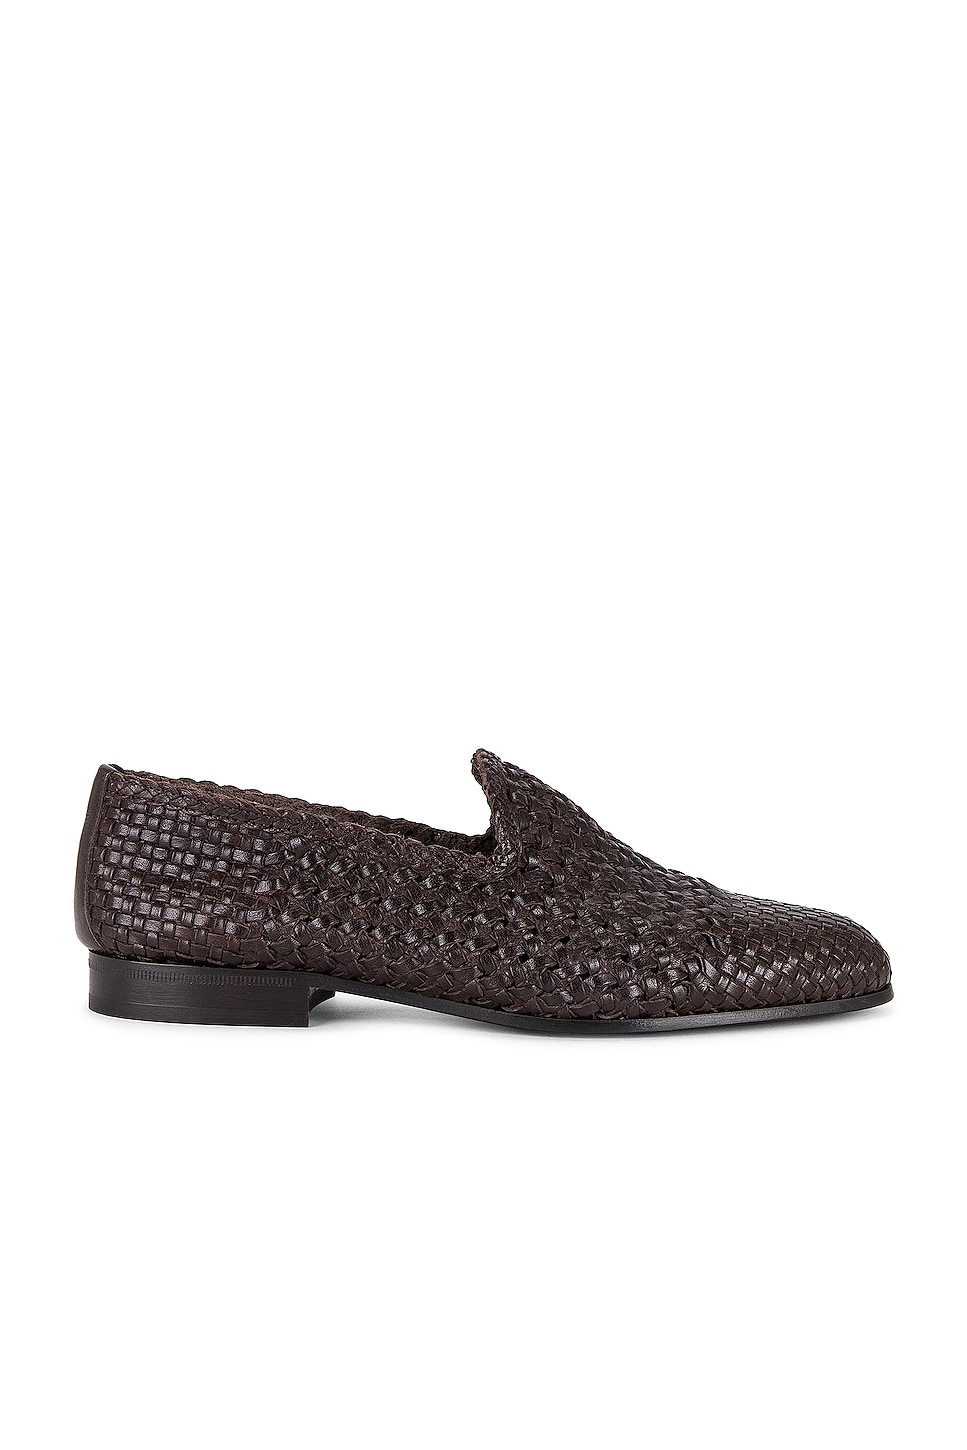 Image 1 of The Row Davis Loafer in Dark Brown